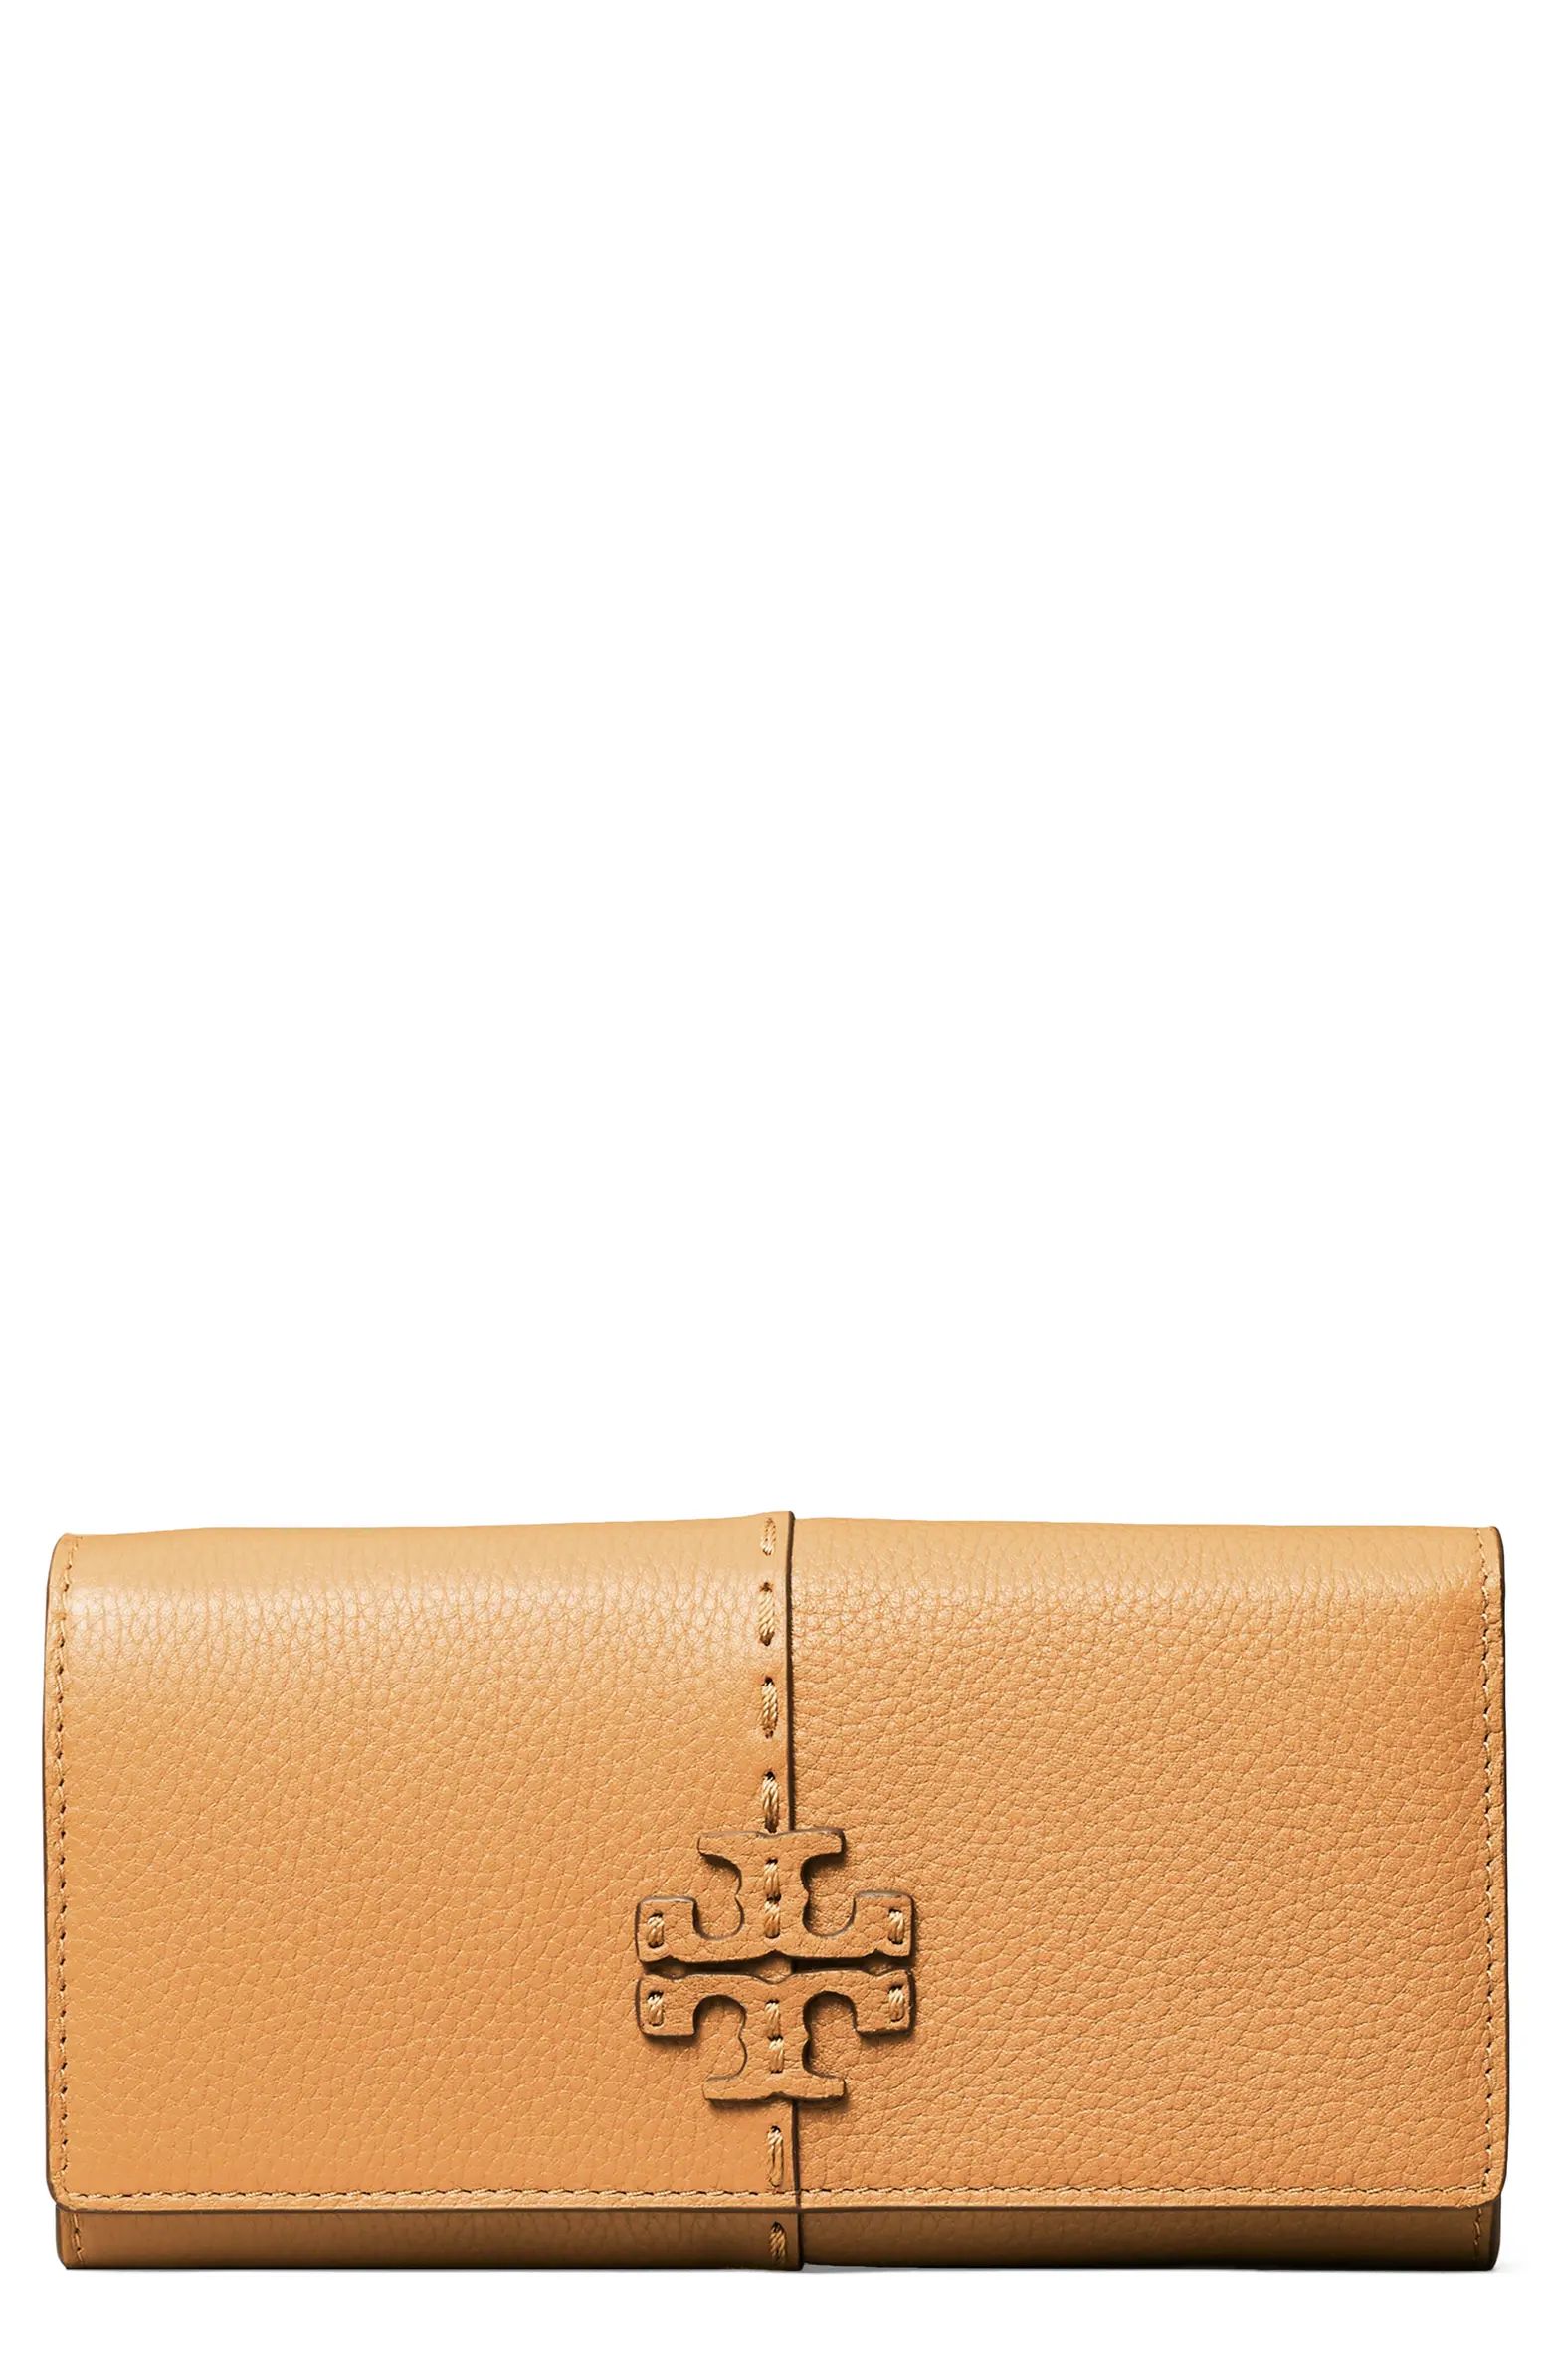 Tory Burch McGraw Leather Envelope Wallet | Nordstrom | Nordstrom